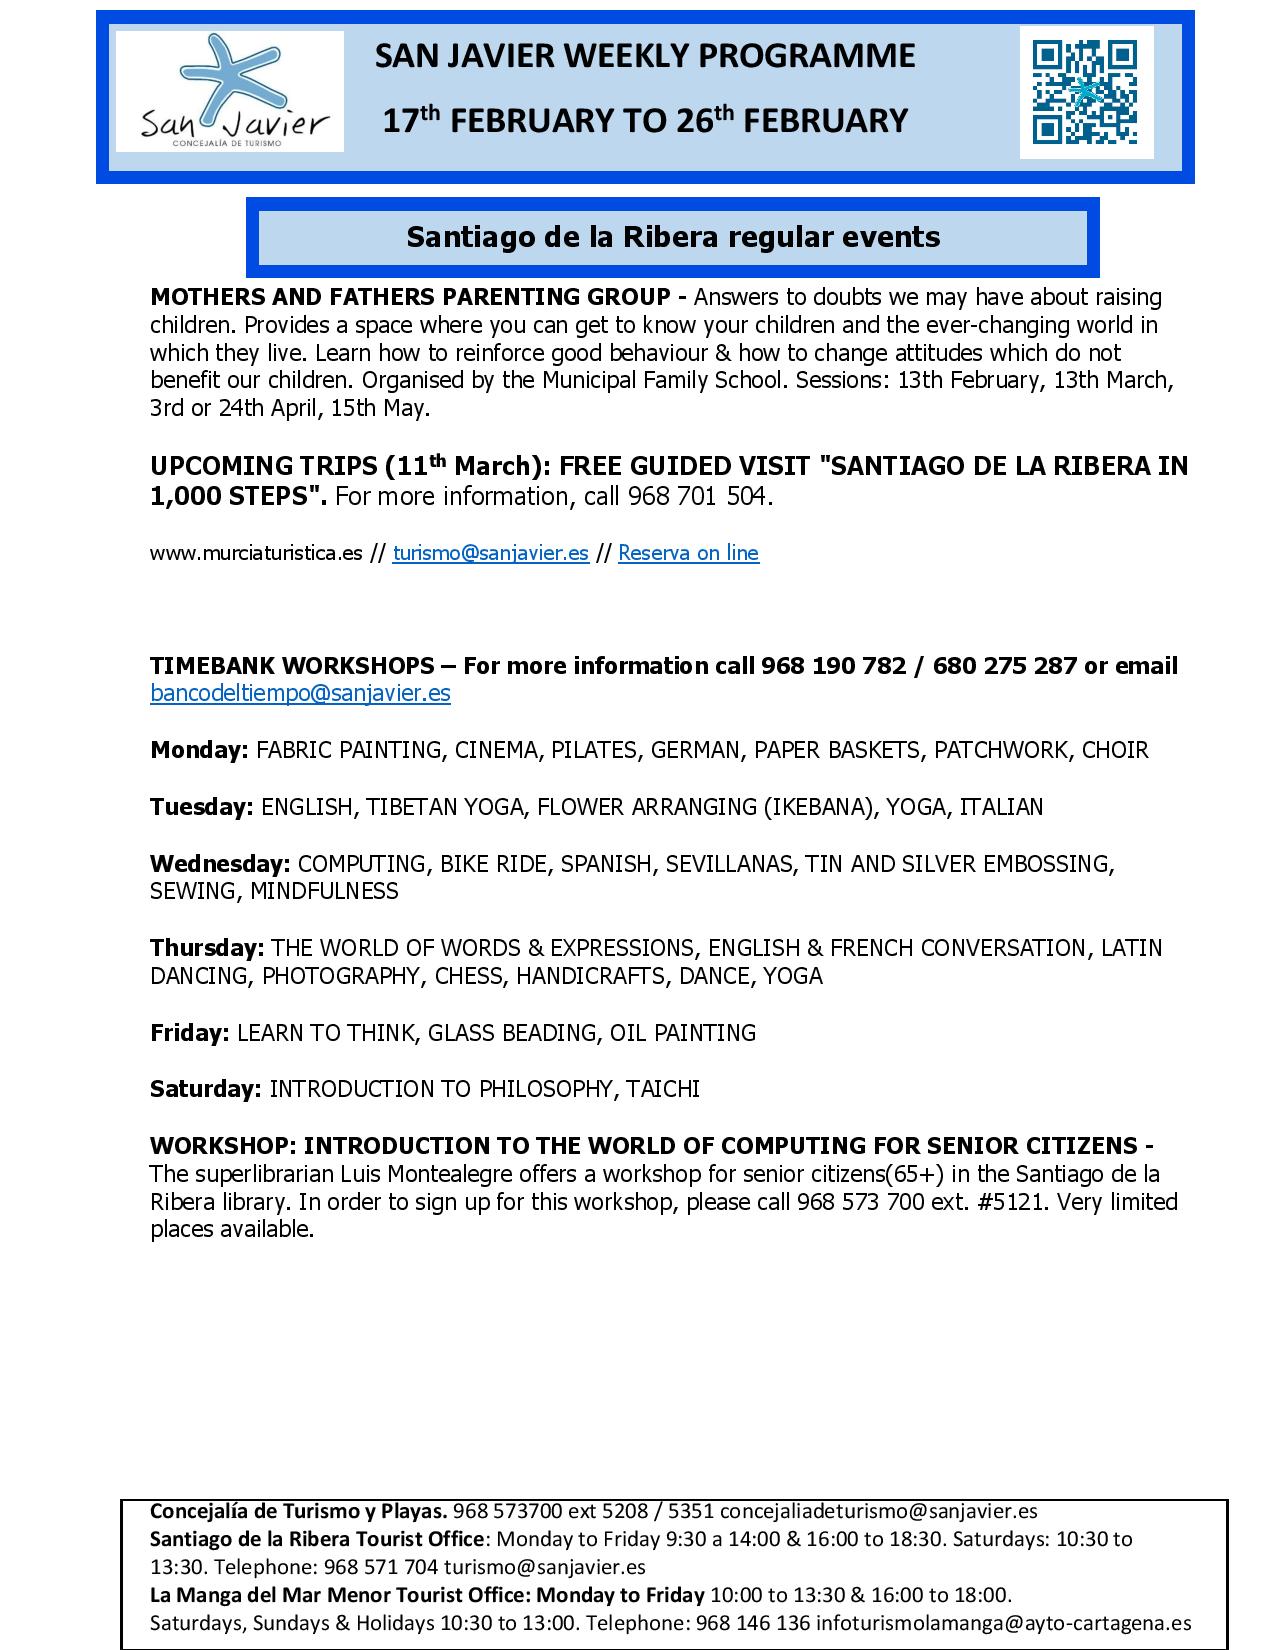 San Javier programme 17-2-17 to 26-2-17-page-002